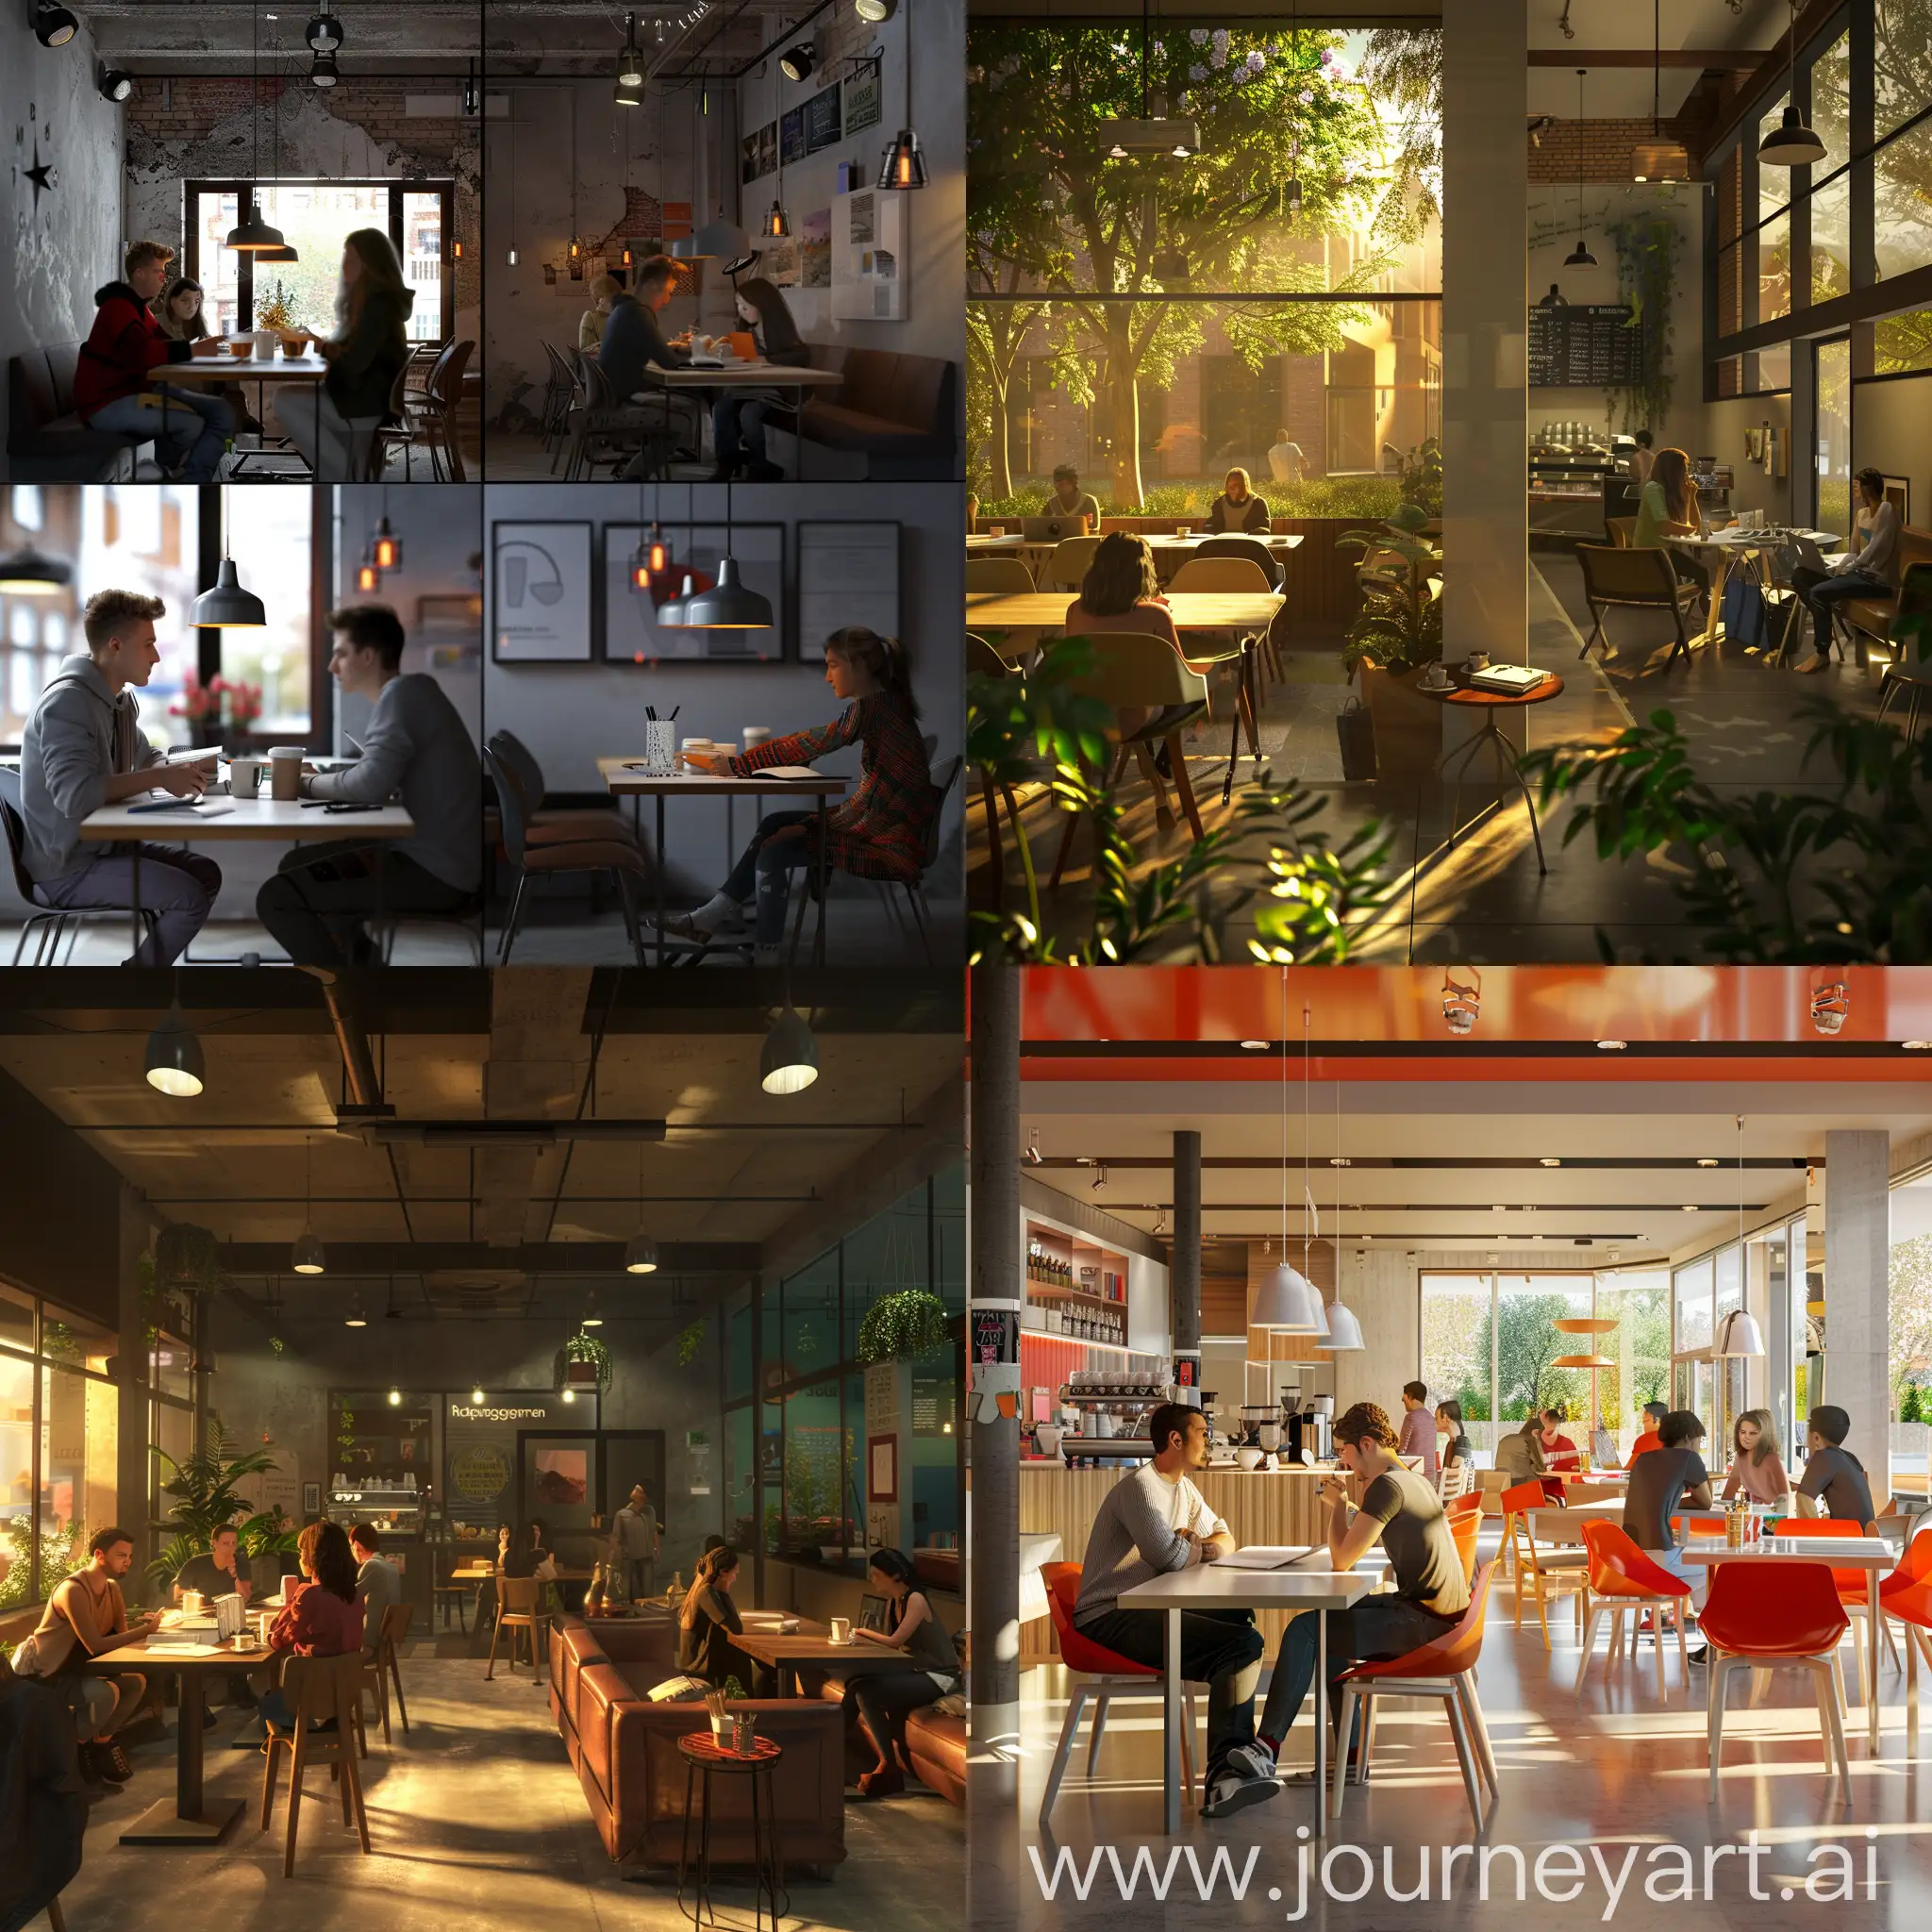 photorealistic, design an enviroment for studying and drinking coffe and focusing in the college for architecture students ,private spaces and also for groups of friends, lively, creative enviroment,